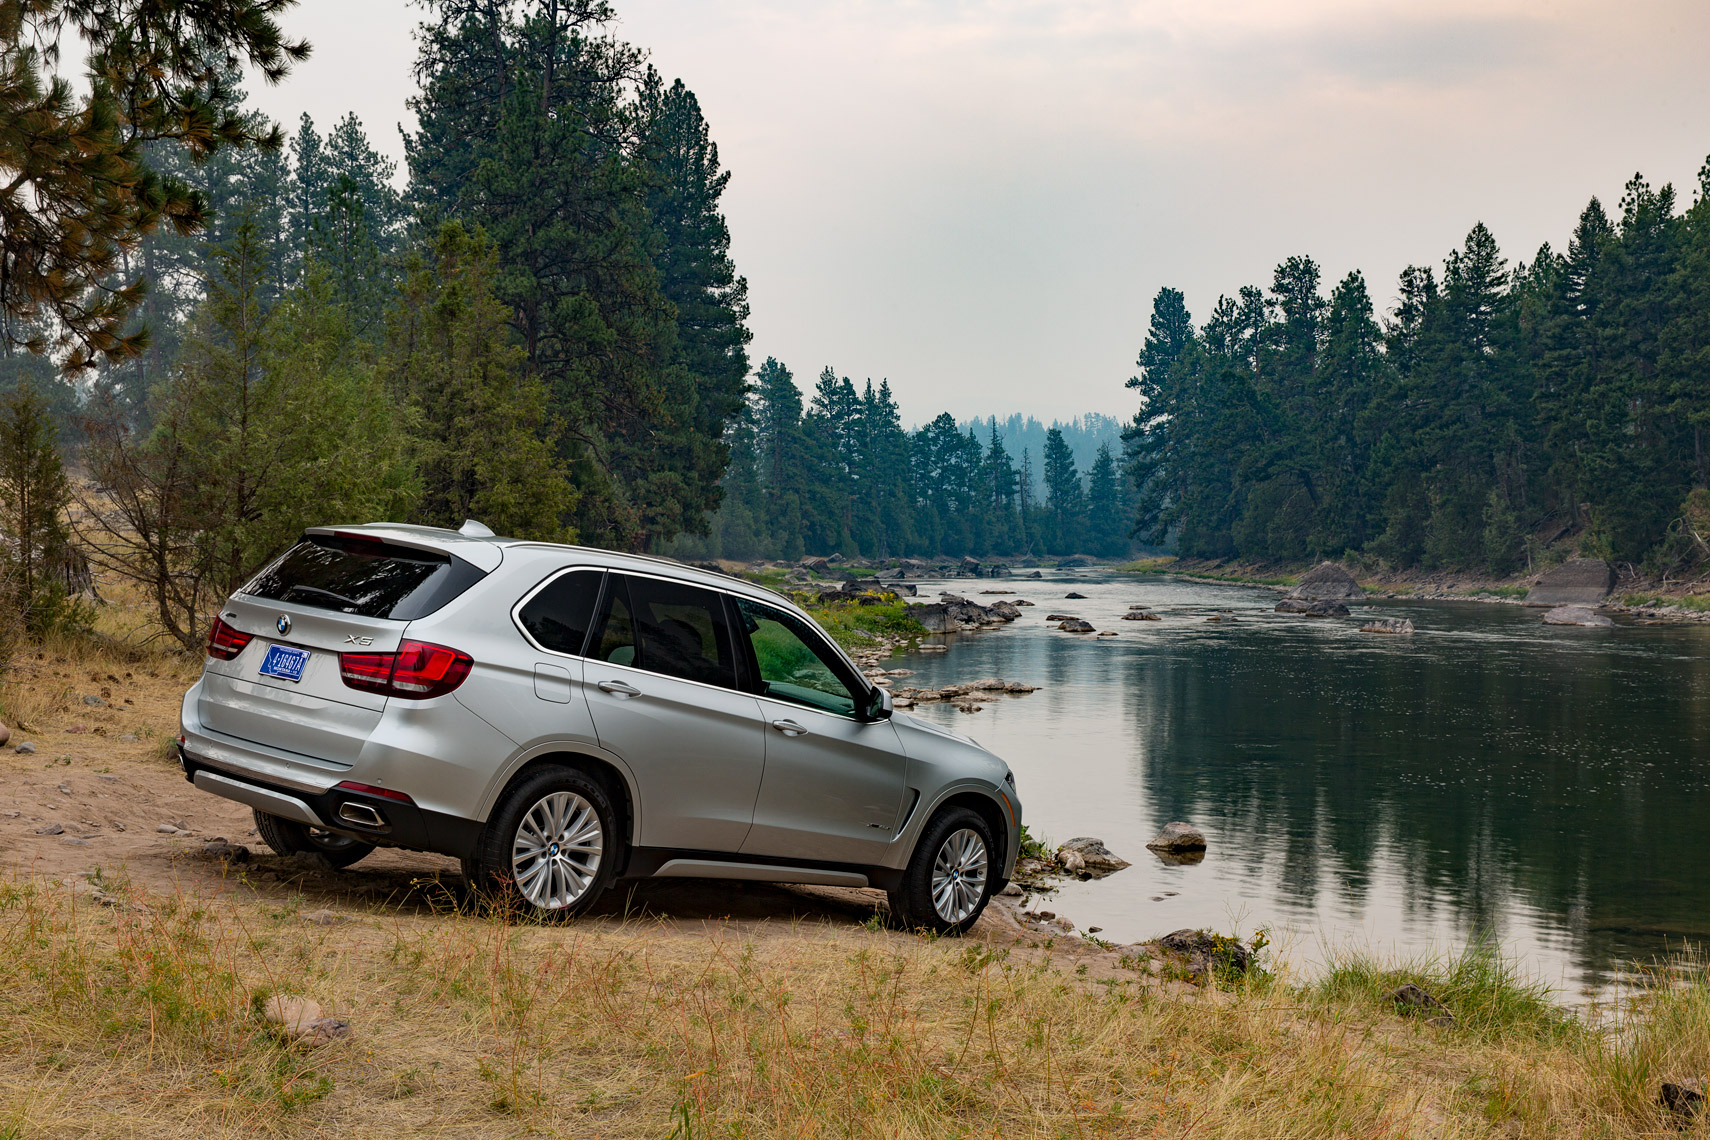 BMW X5 The Resort at Paws Up  Montana Blackfoot River Poul Ober Photography